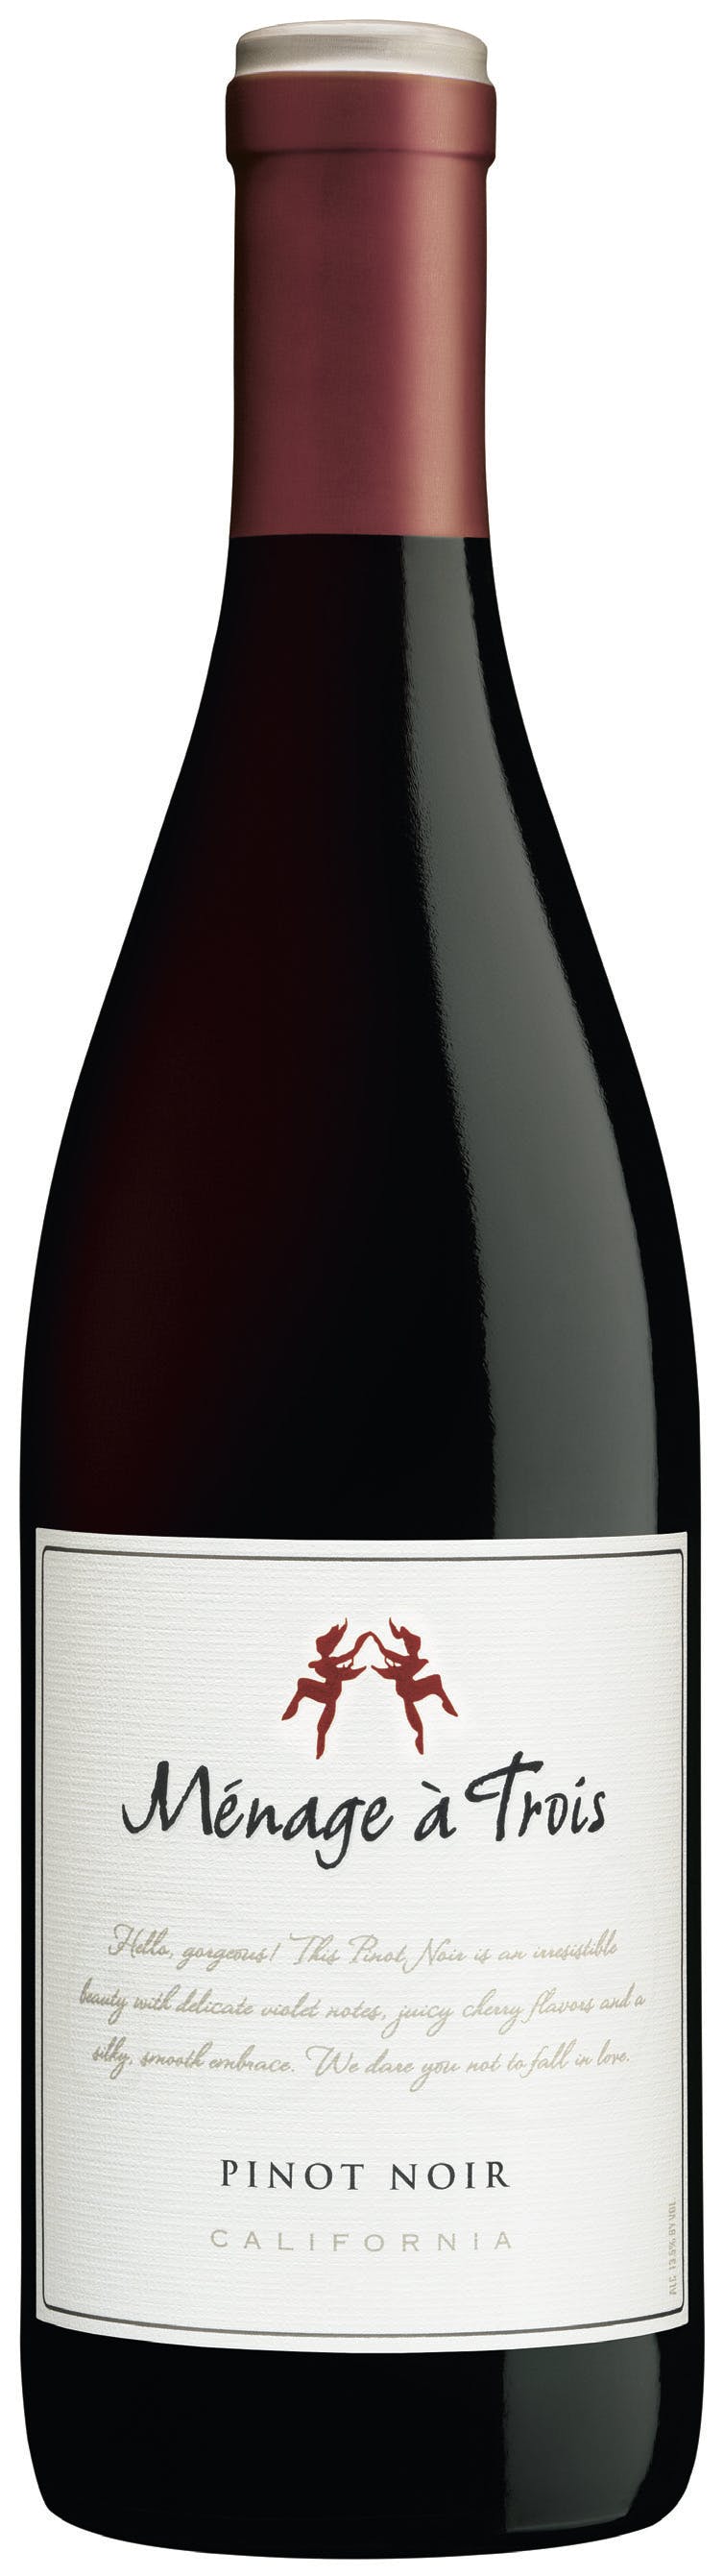 Ménage à Trois Pinot Noir 2018 750ml Busters Liquors And Wines